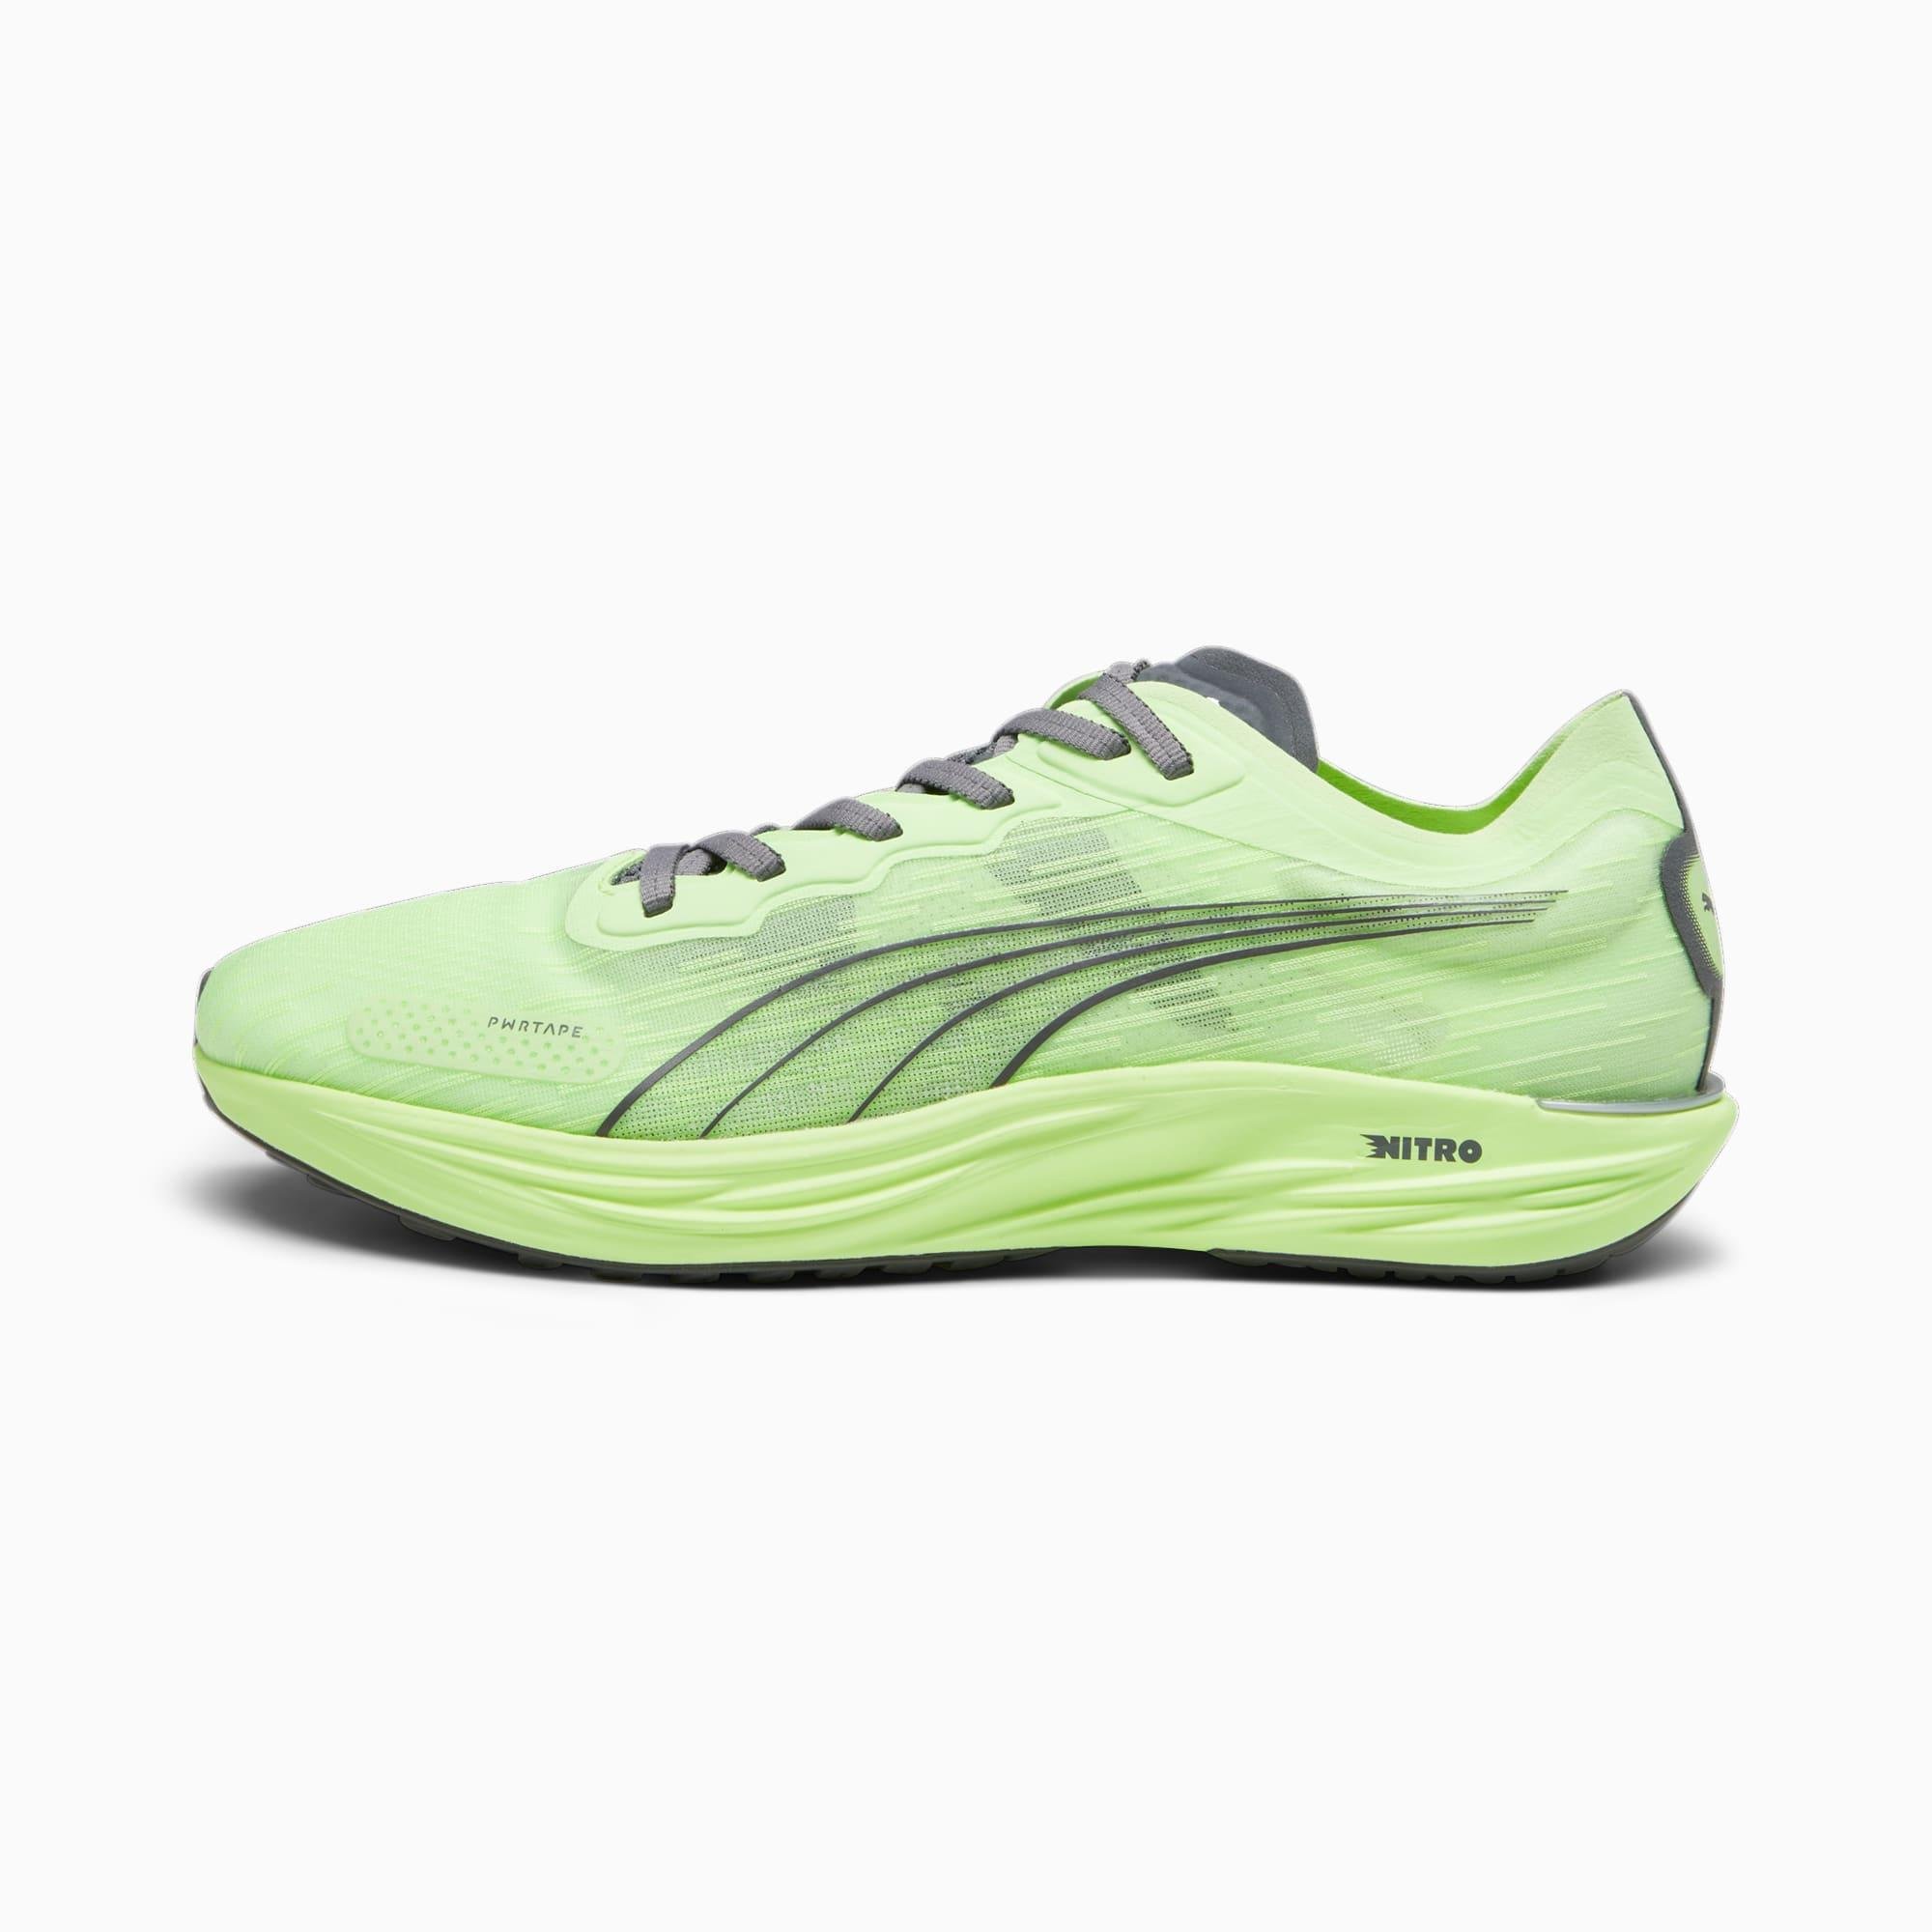 Liberate NITRO™ 2 Men's Running Shoes by PUMA